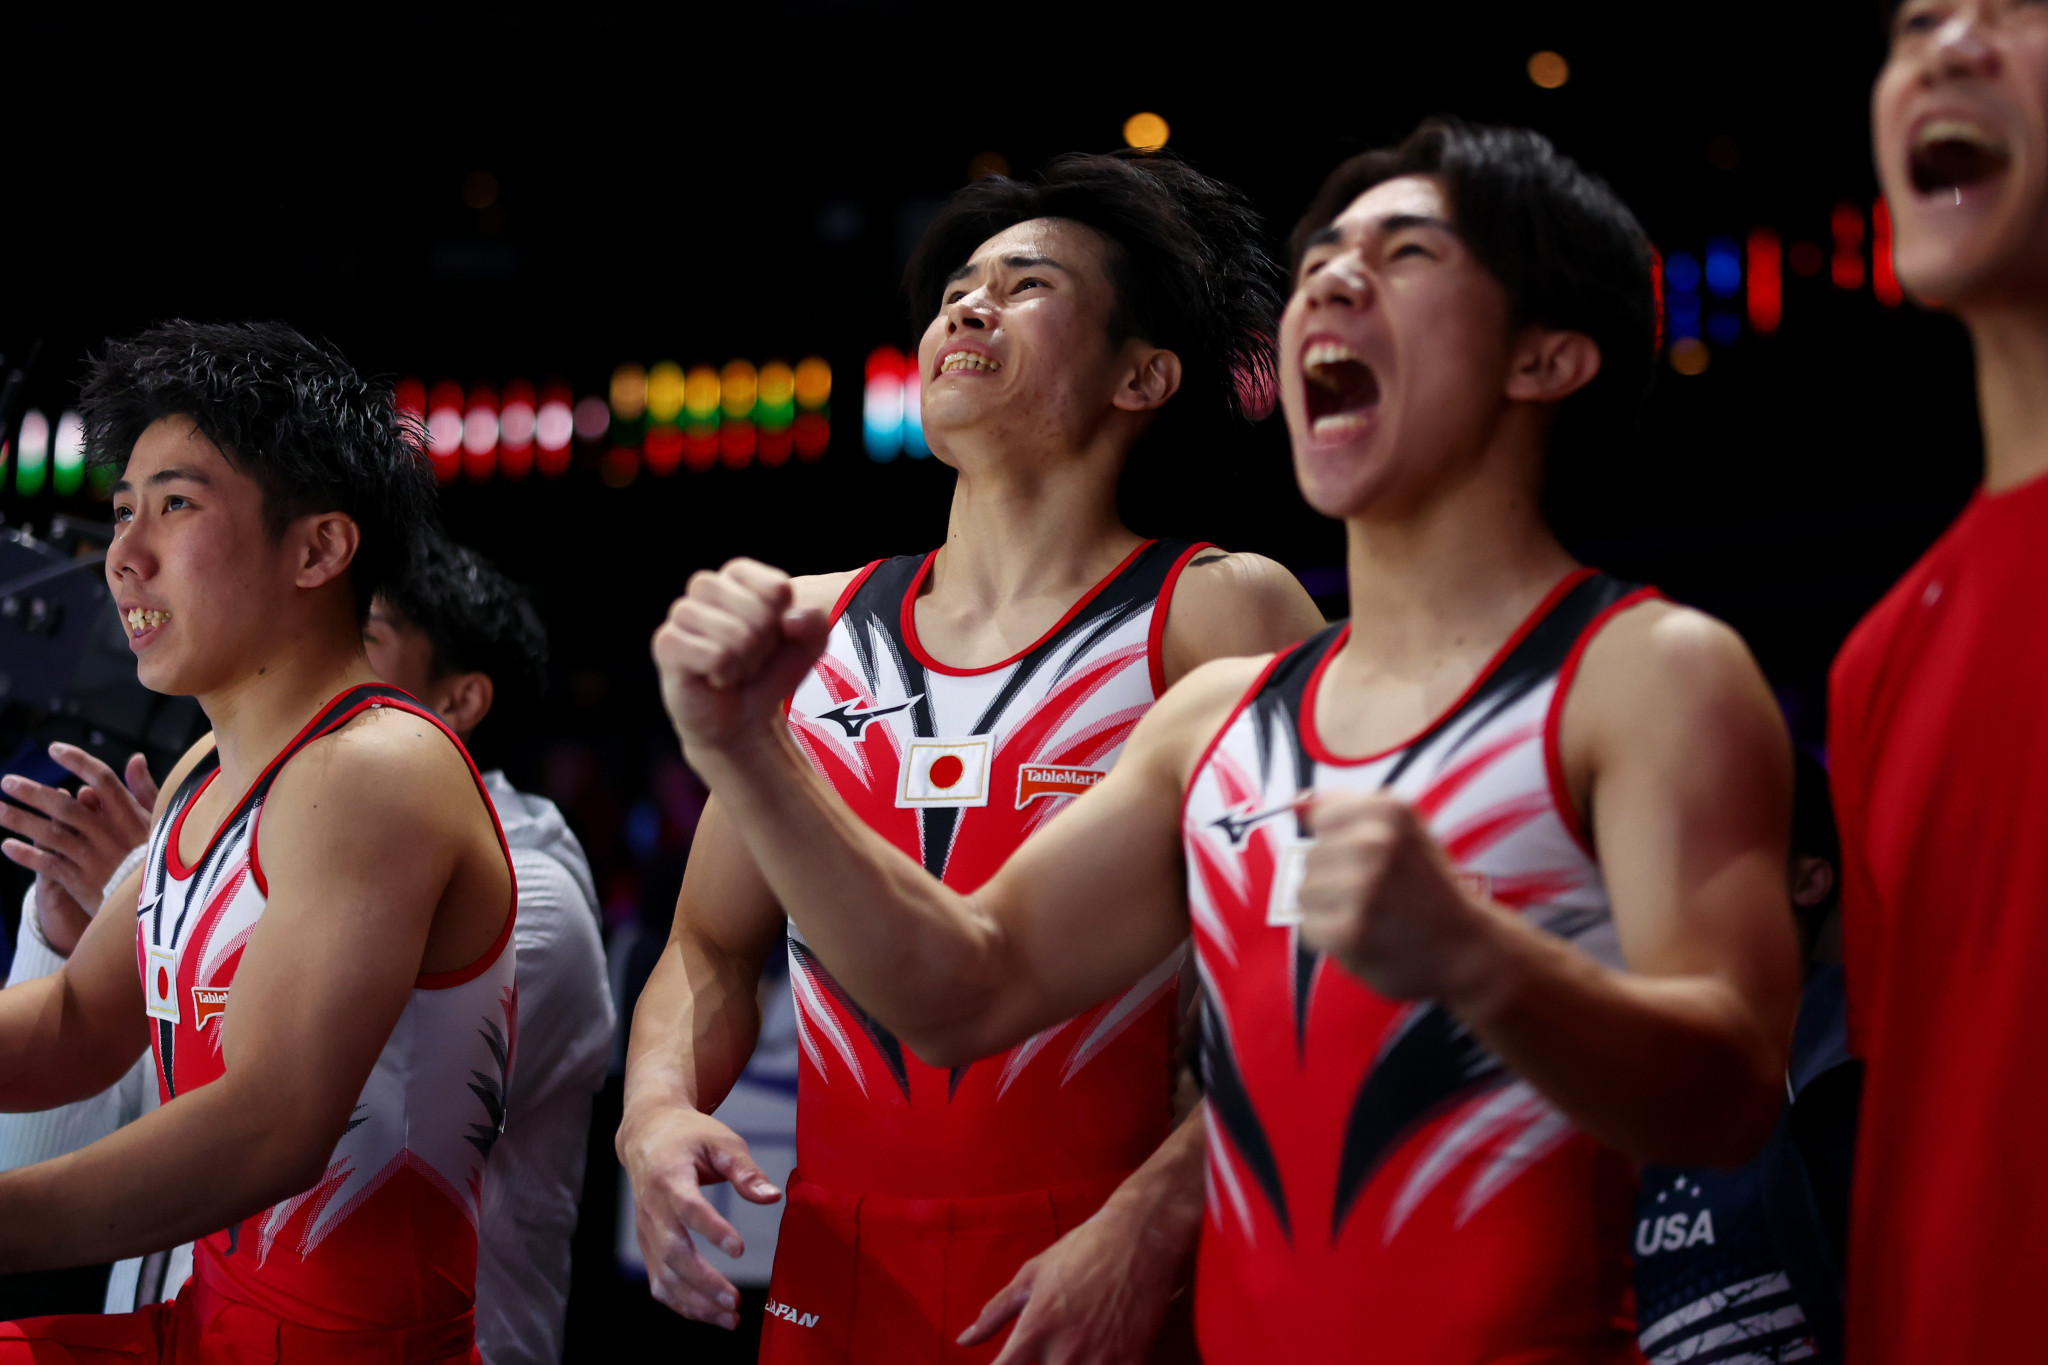 Japan win men’s team title at World Artistic Gymnastics Championships after beating holders China